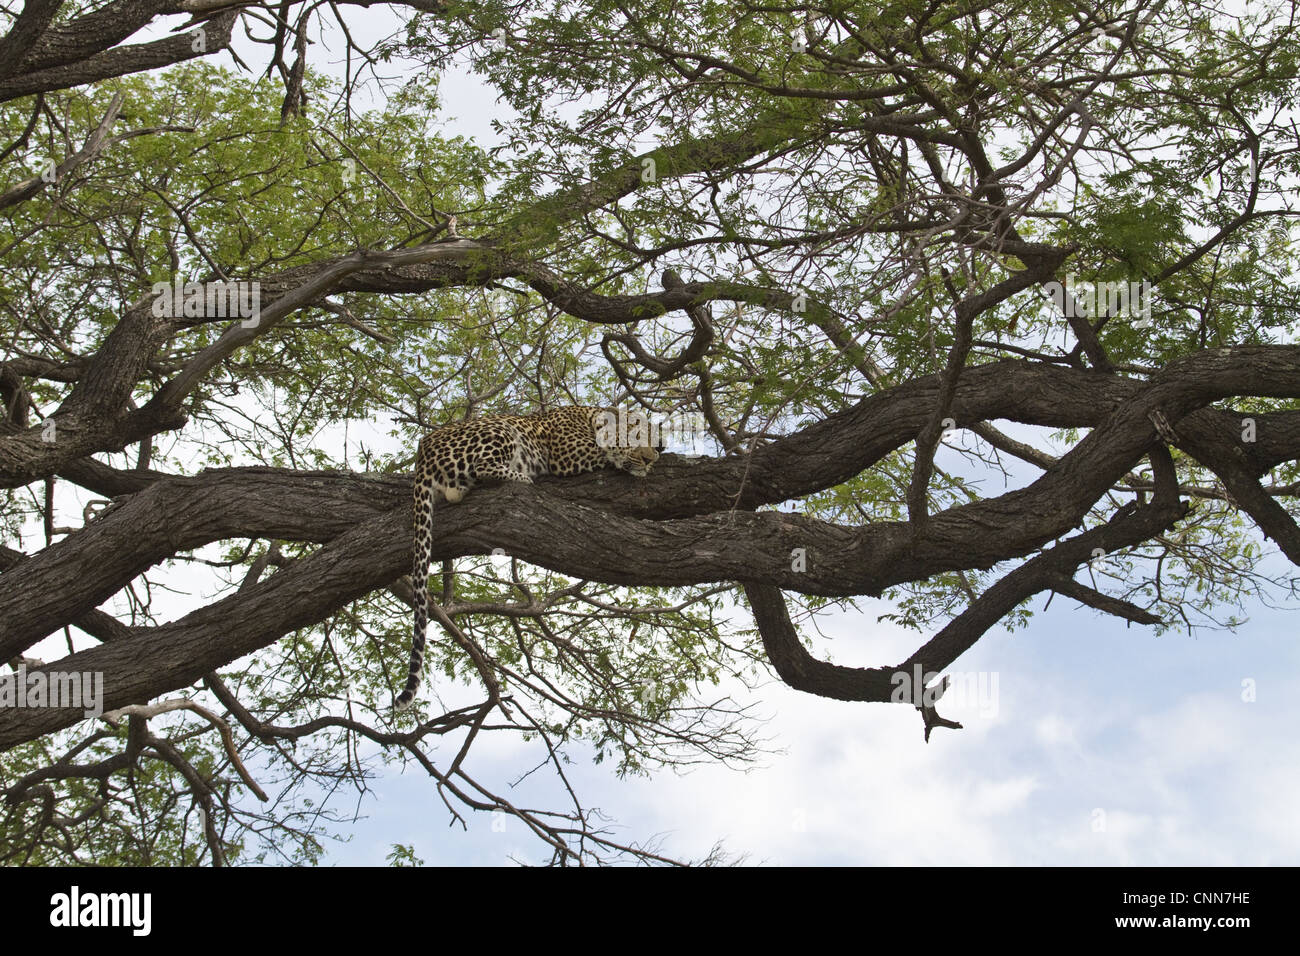 African Leopard rests on tree branch - Botswana Stock Photo